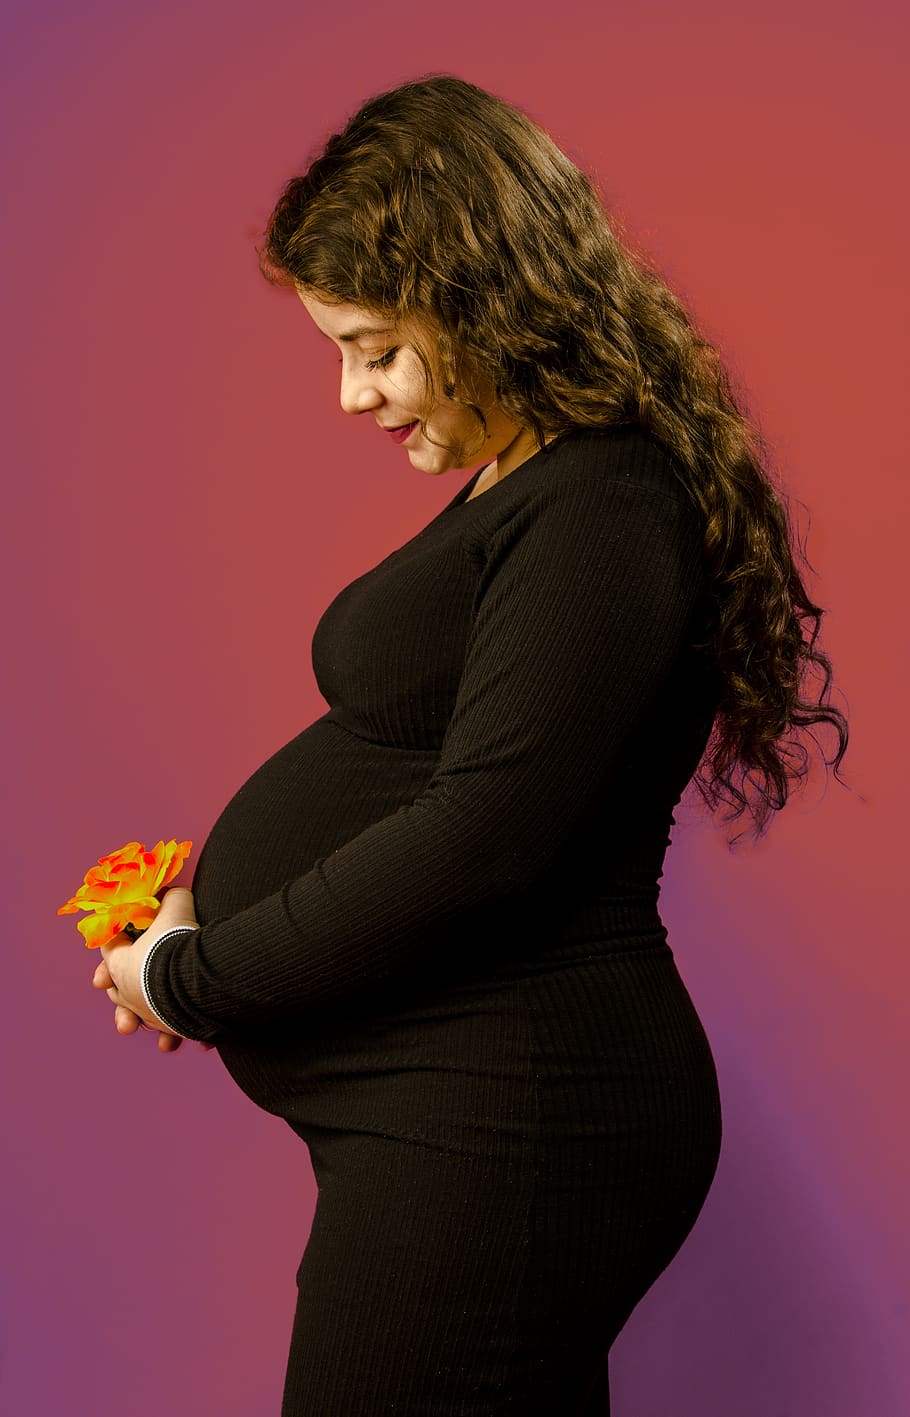 HD wallpaper: pregnant woman, flower, belly, mother, big belly